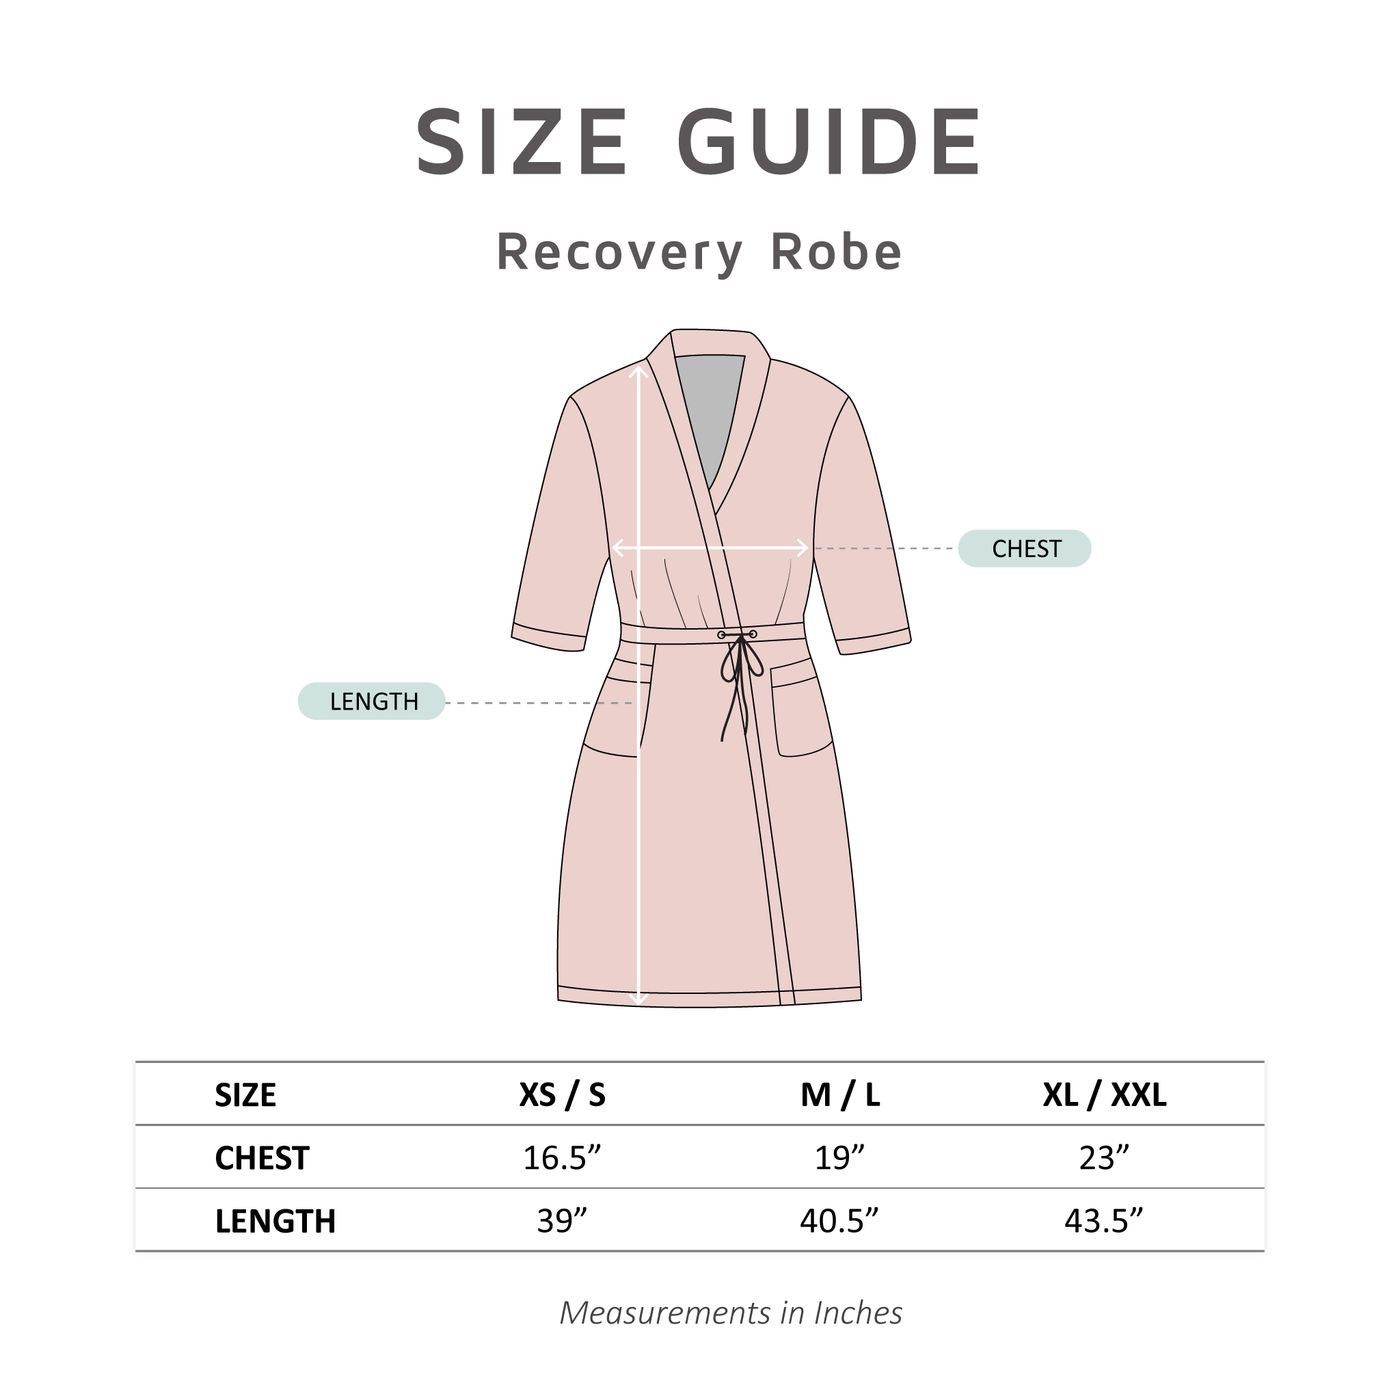 Burgundy Post Surgery Recovery Robe